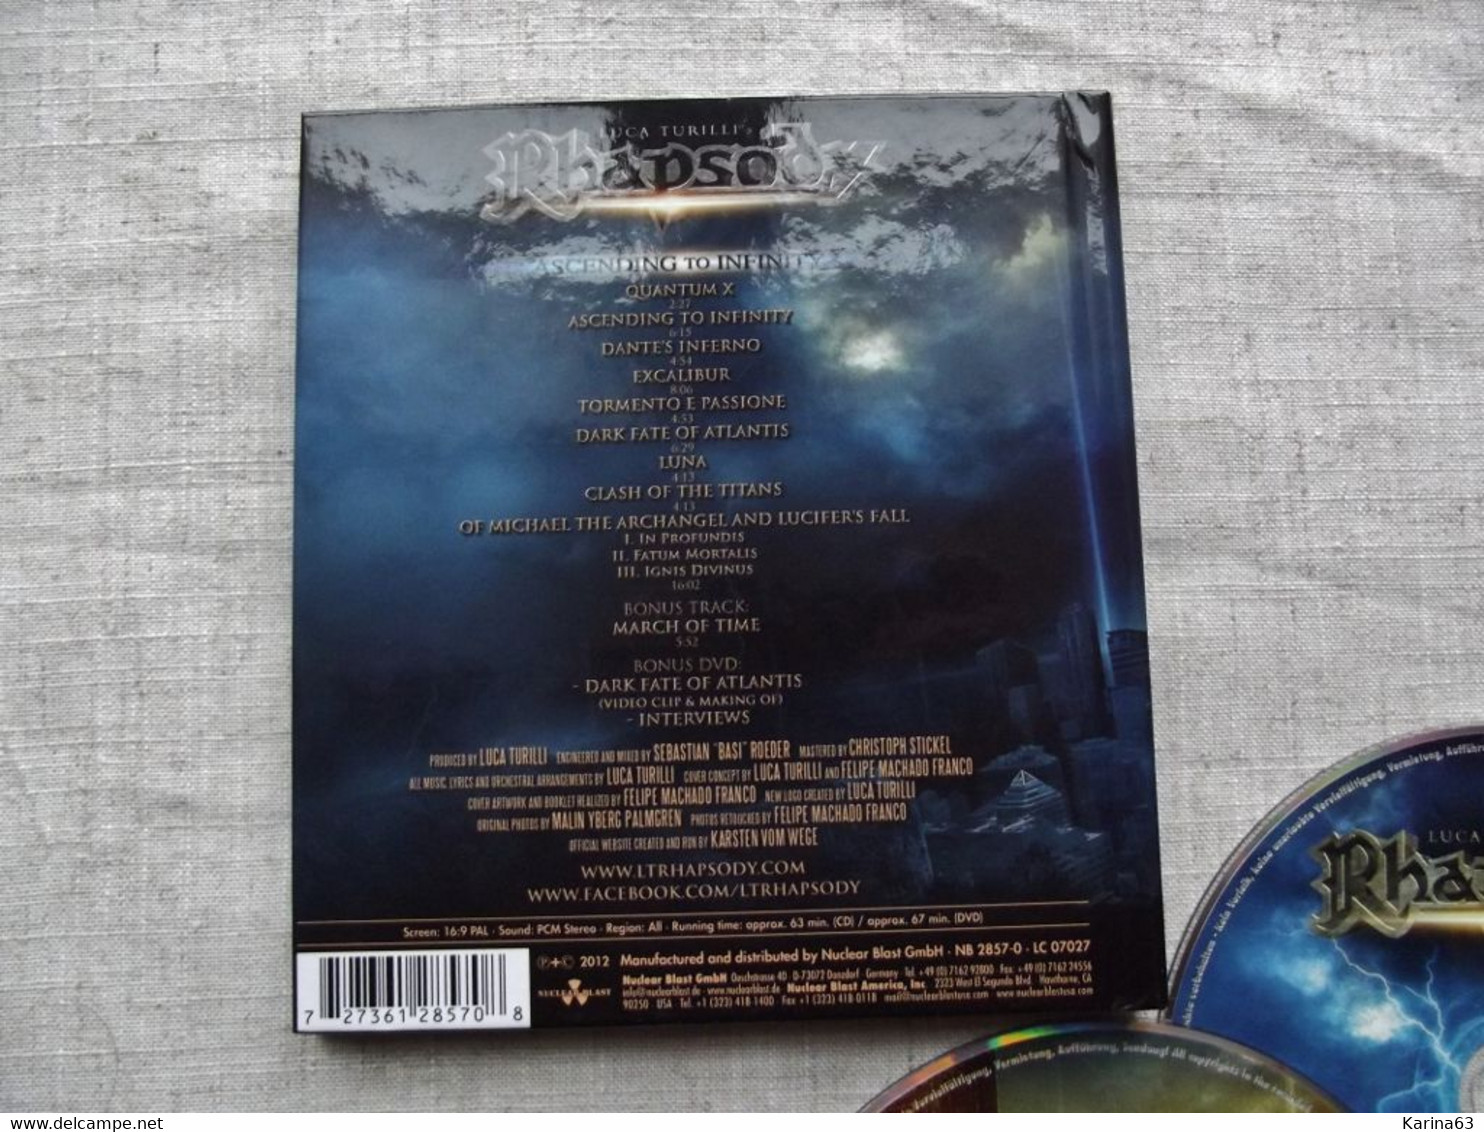 Luca Turilli's Rhapsody ‎– Ascending To Infinity - Limited Edition - Booklet  + CD/DVD - Limited Editions